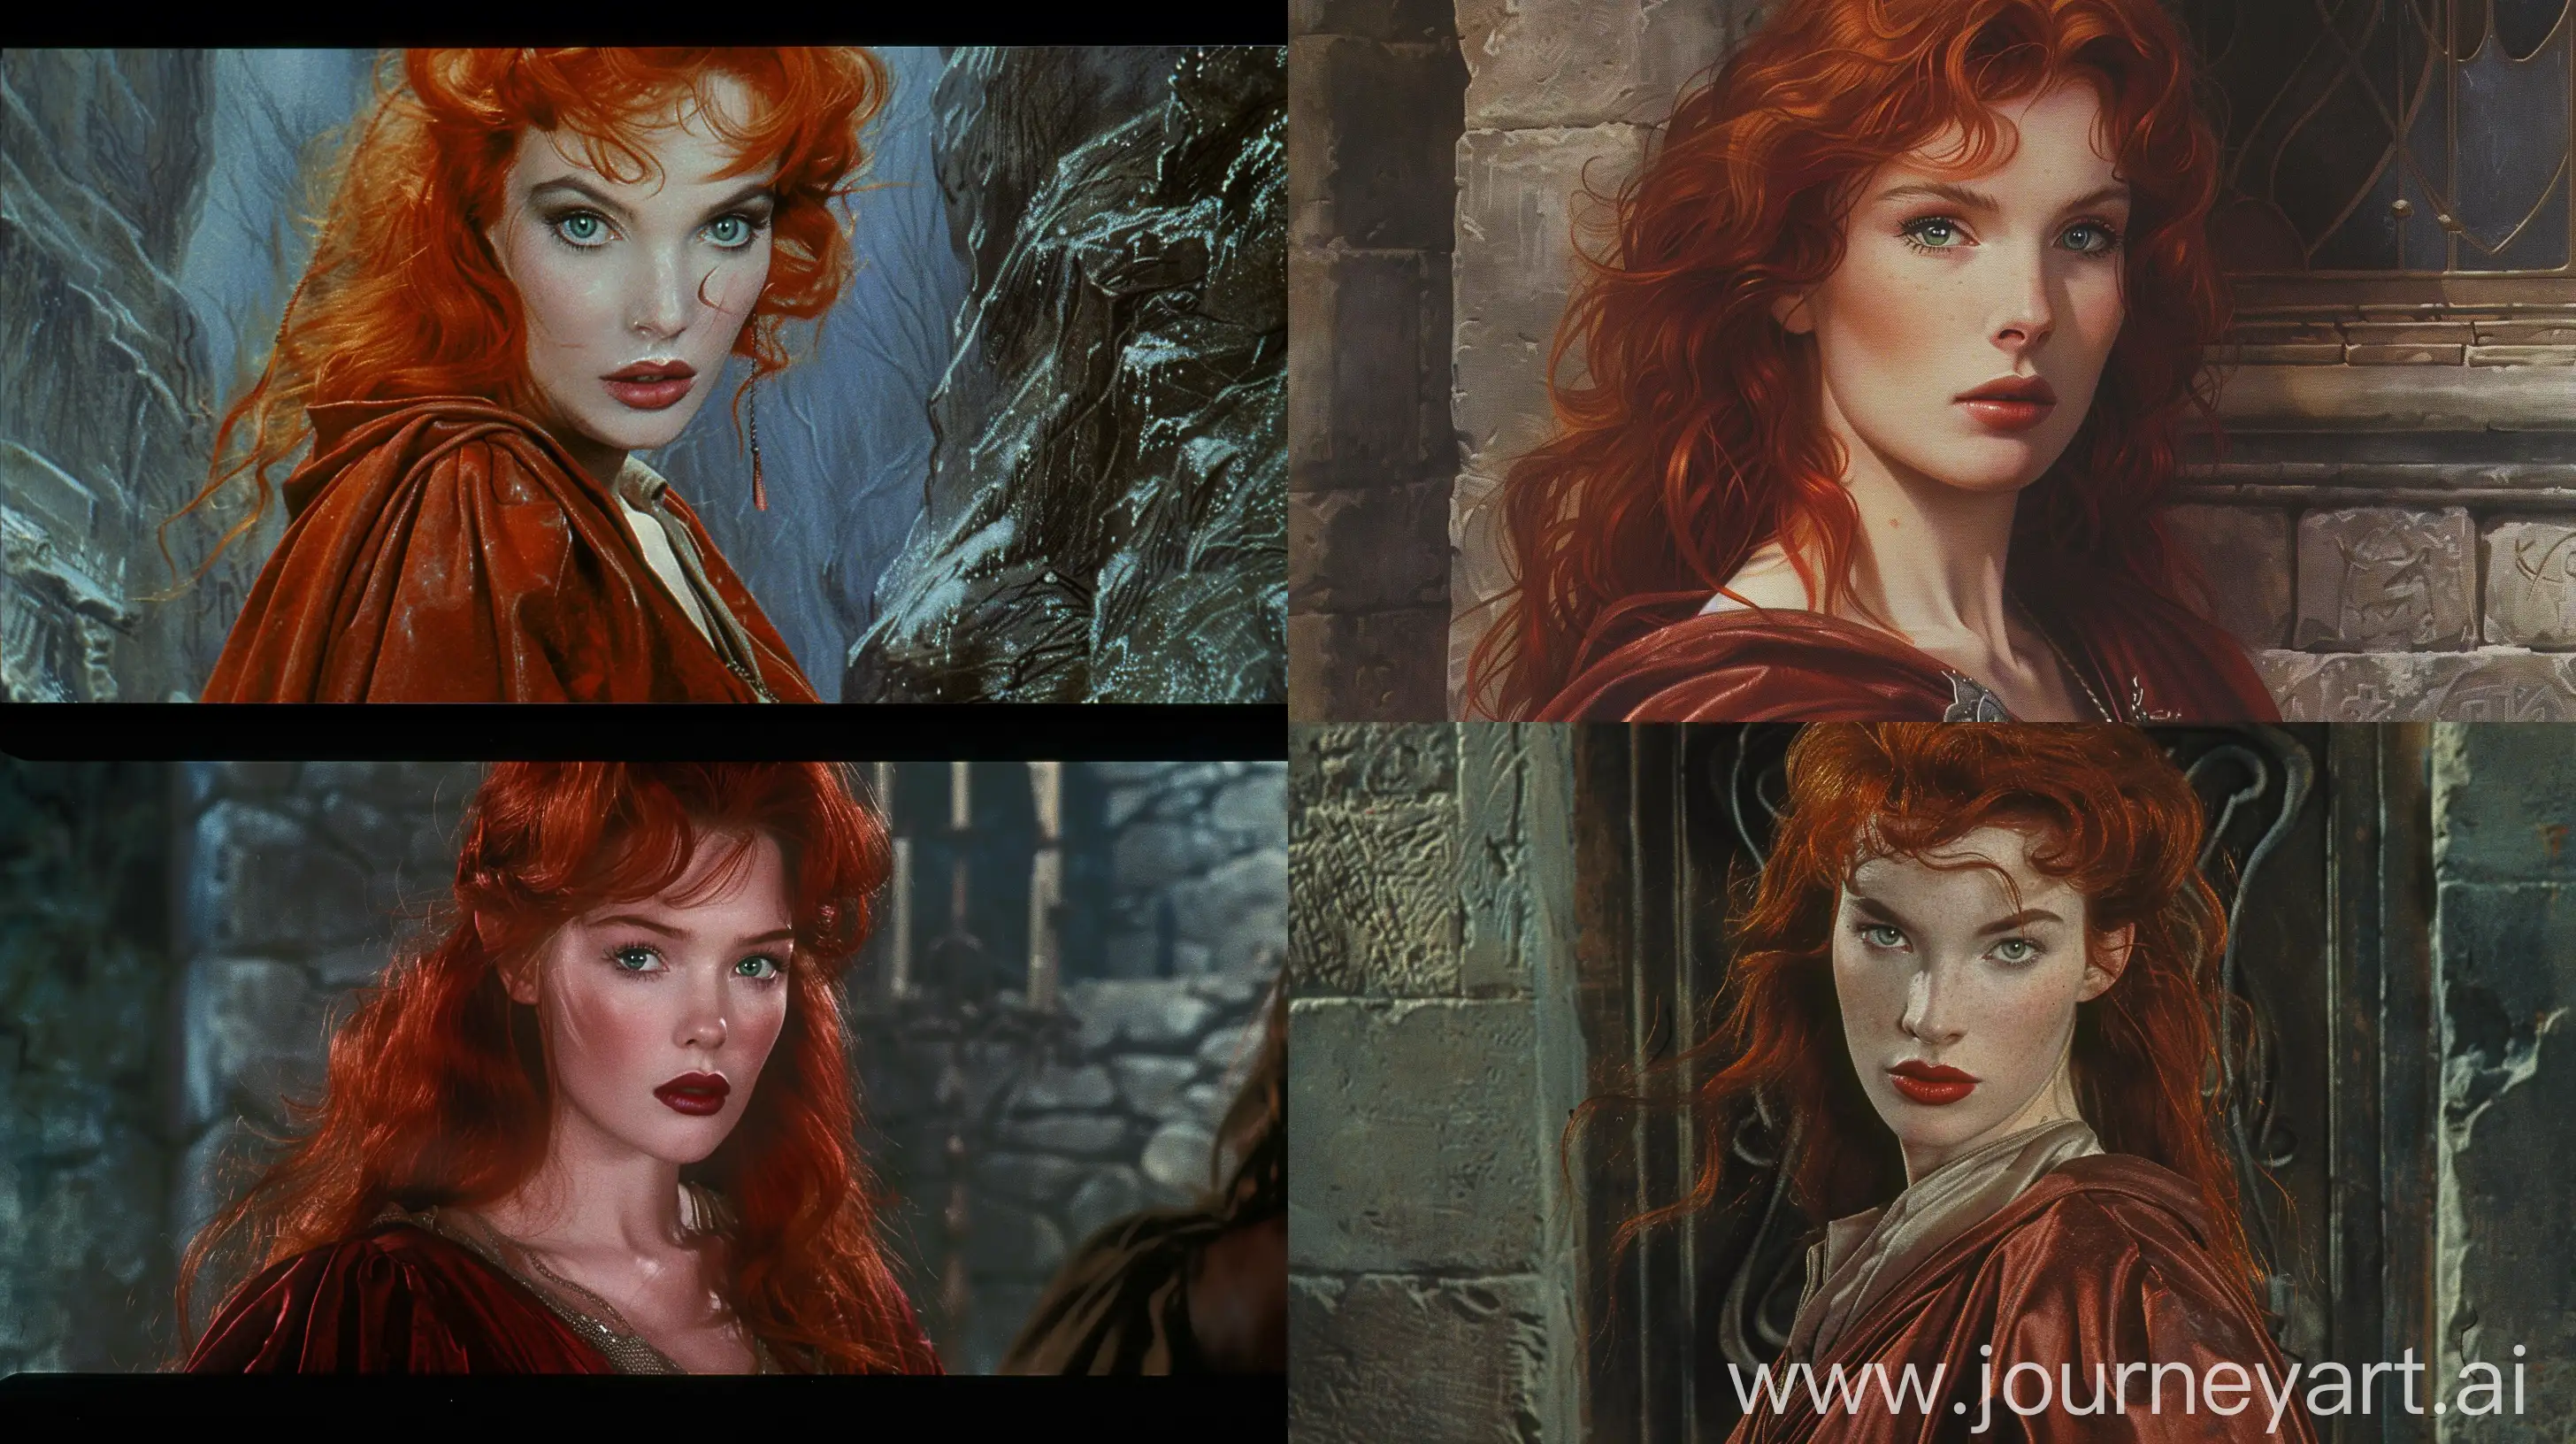 dvd screenshot of Dark Souls fantasy illustration from the 1987s. Artistic illustration of a sorceress with red-haired and emerald eyes, wearing crimson robes that embrace her slender, graceful form, her blush lips contrasting with her snow-white complexion, he had worn a brown leather doublet. Screenshot from the 1987 Dark Souls costume DVD, fantasy book illustration. --ar 16:9